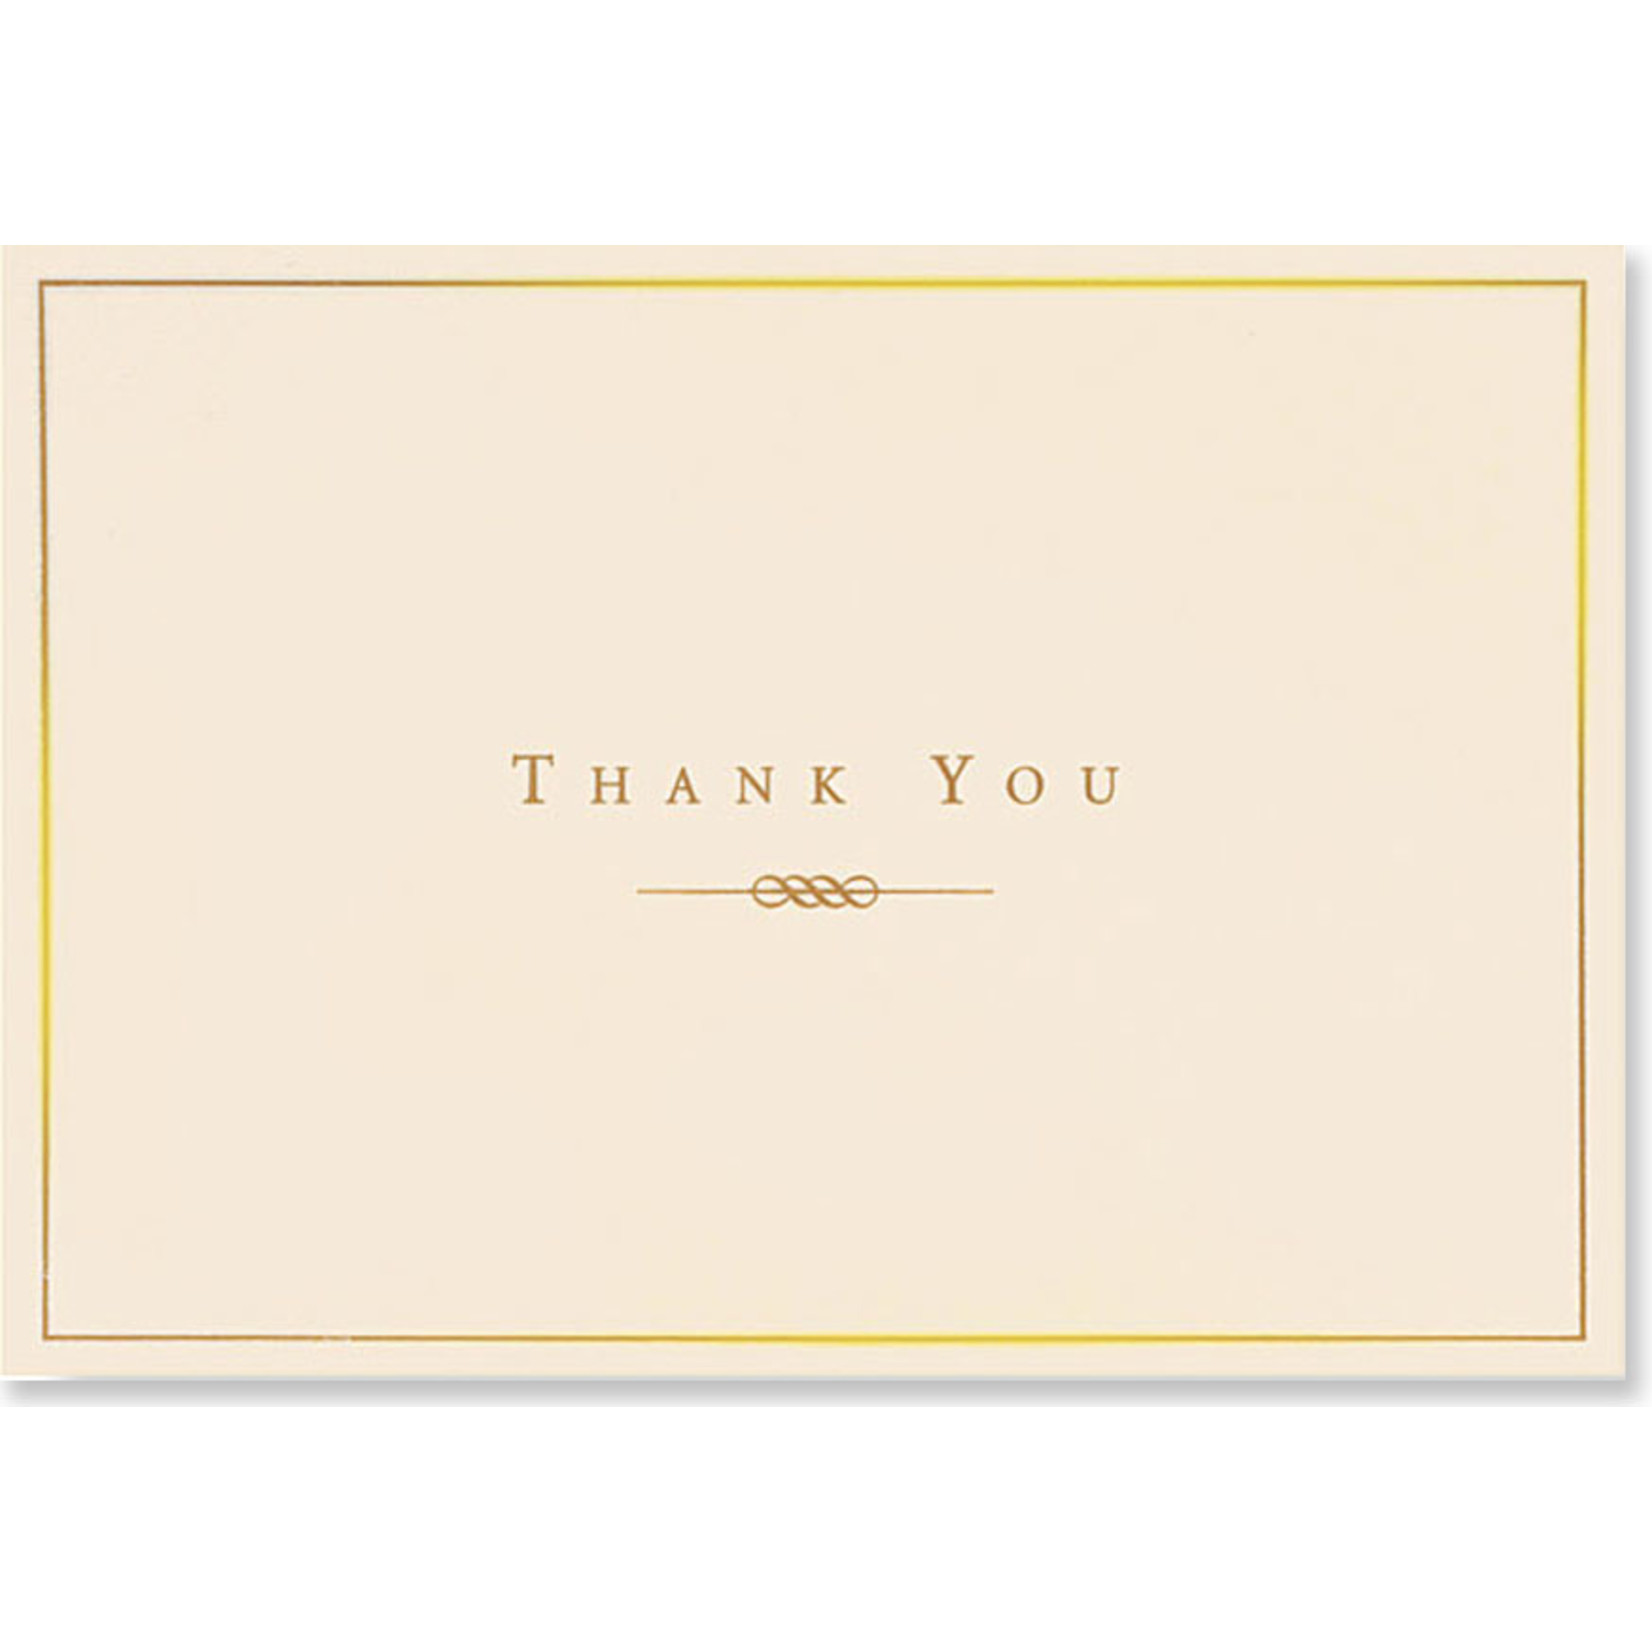 Peter Pauper Press Boxed Thank You Cards: Gold/Cream